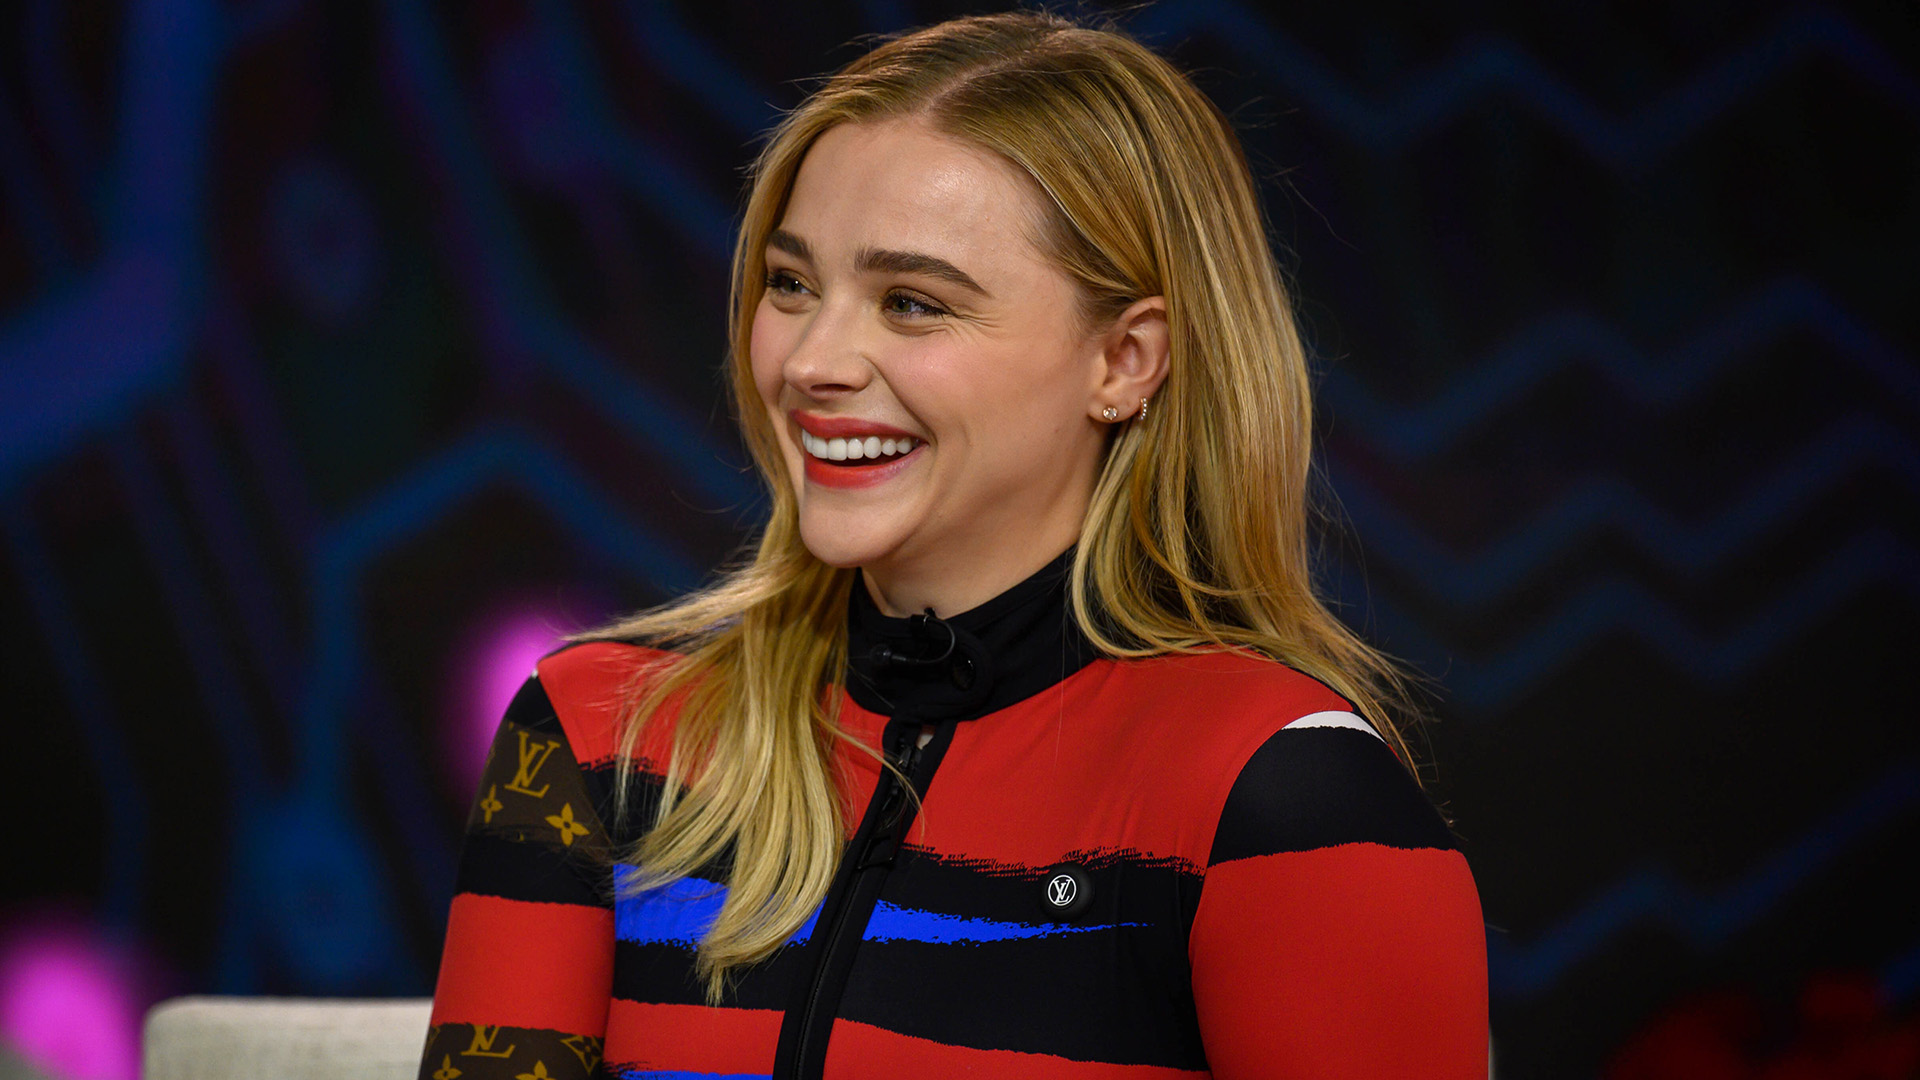 Chloe Grace Moretz says she 'became a recluse' after a meme about